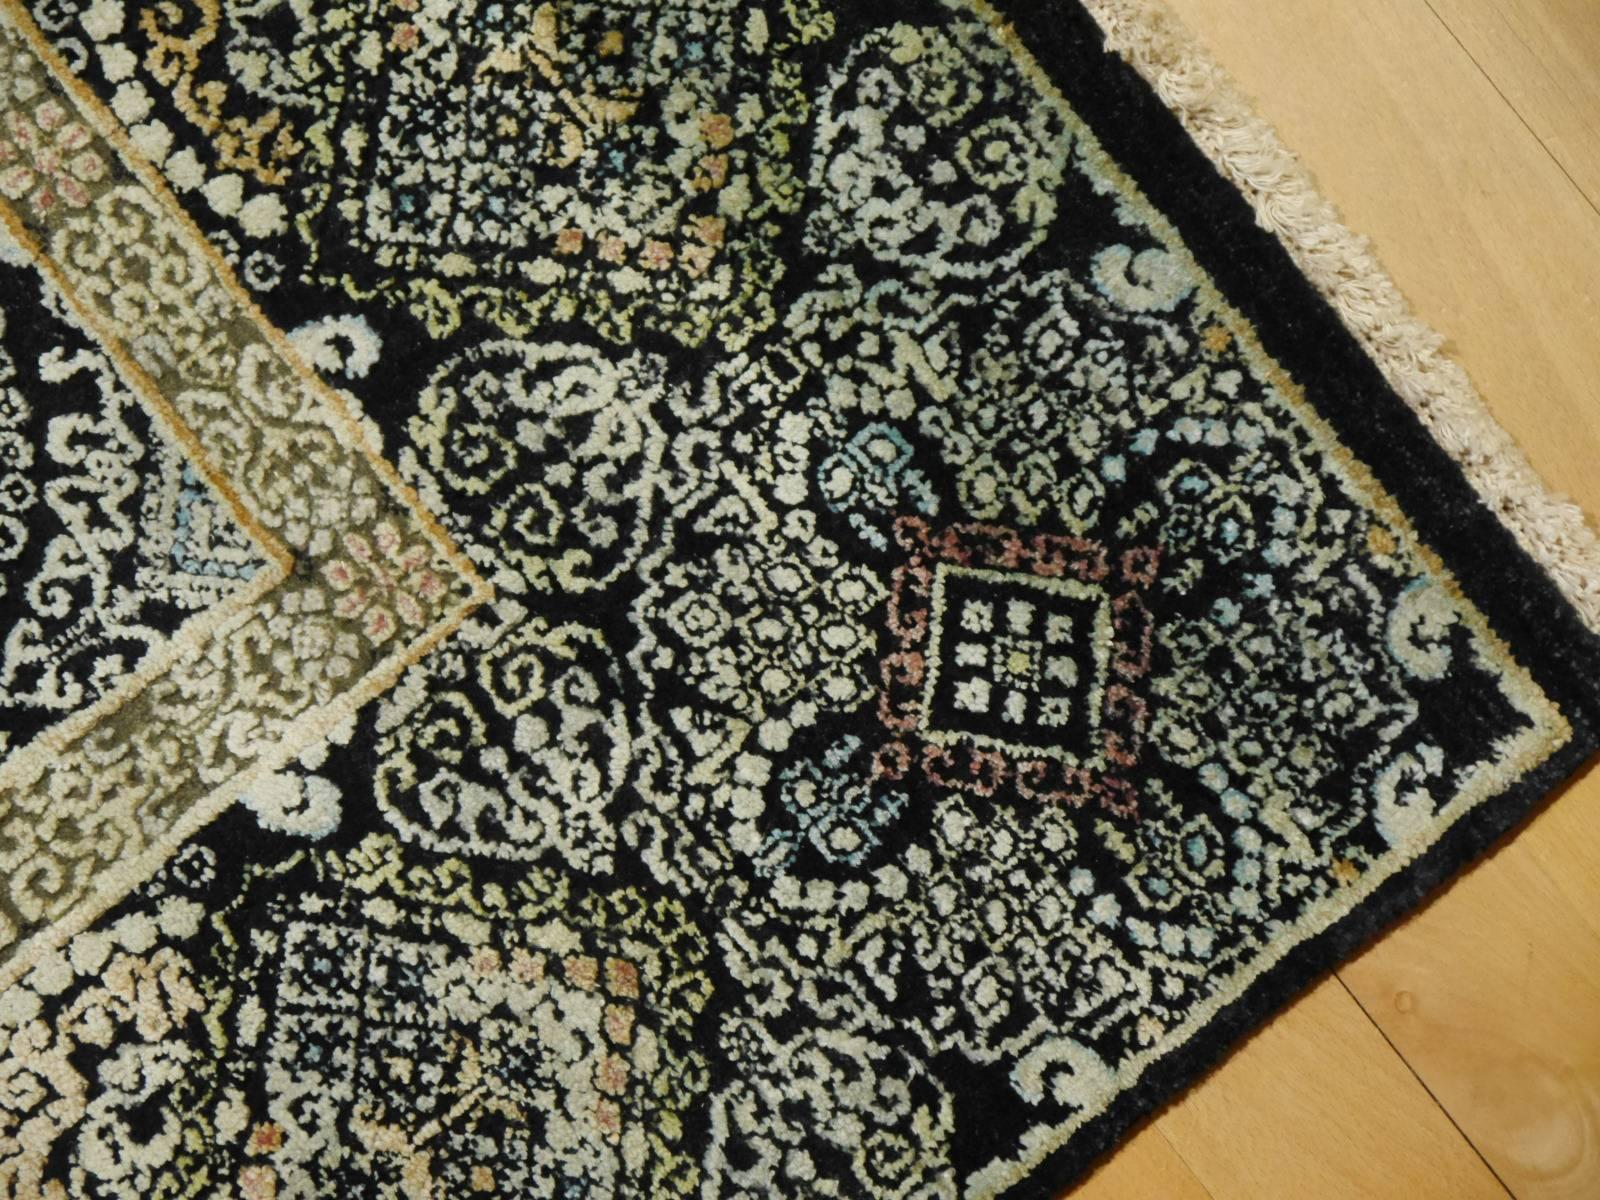 This fine hand knotted contemorary rug comes from the North Indian region of Rajasthan. It was hand knotted using finest raw materials such as the famous Bikaner wool and pure natural mulberry silk. The pile of the rug is combined of 70% silk and